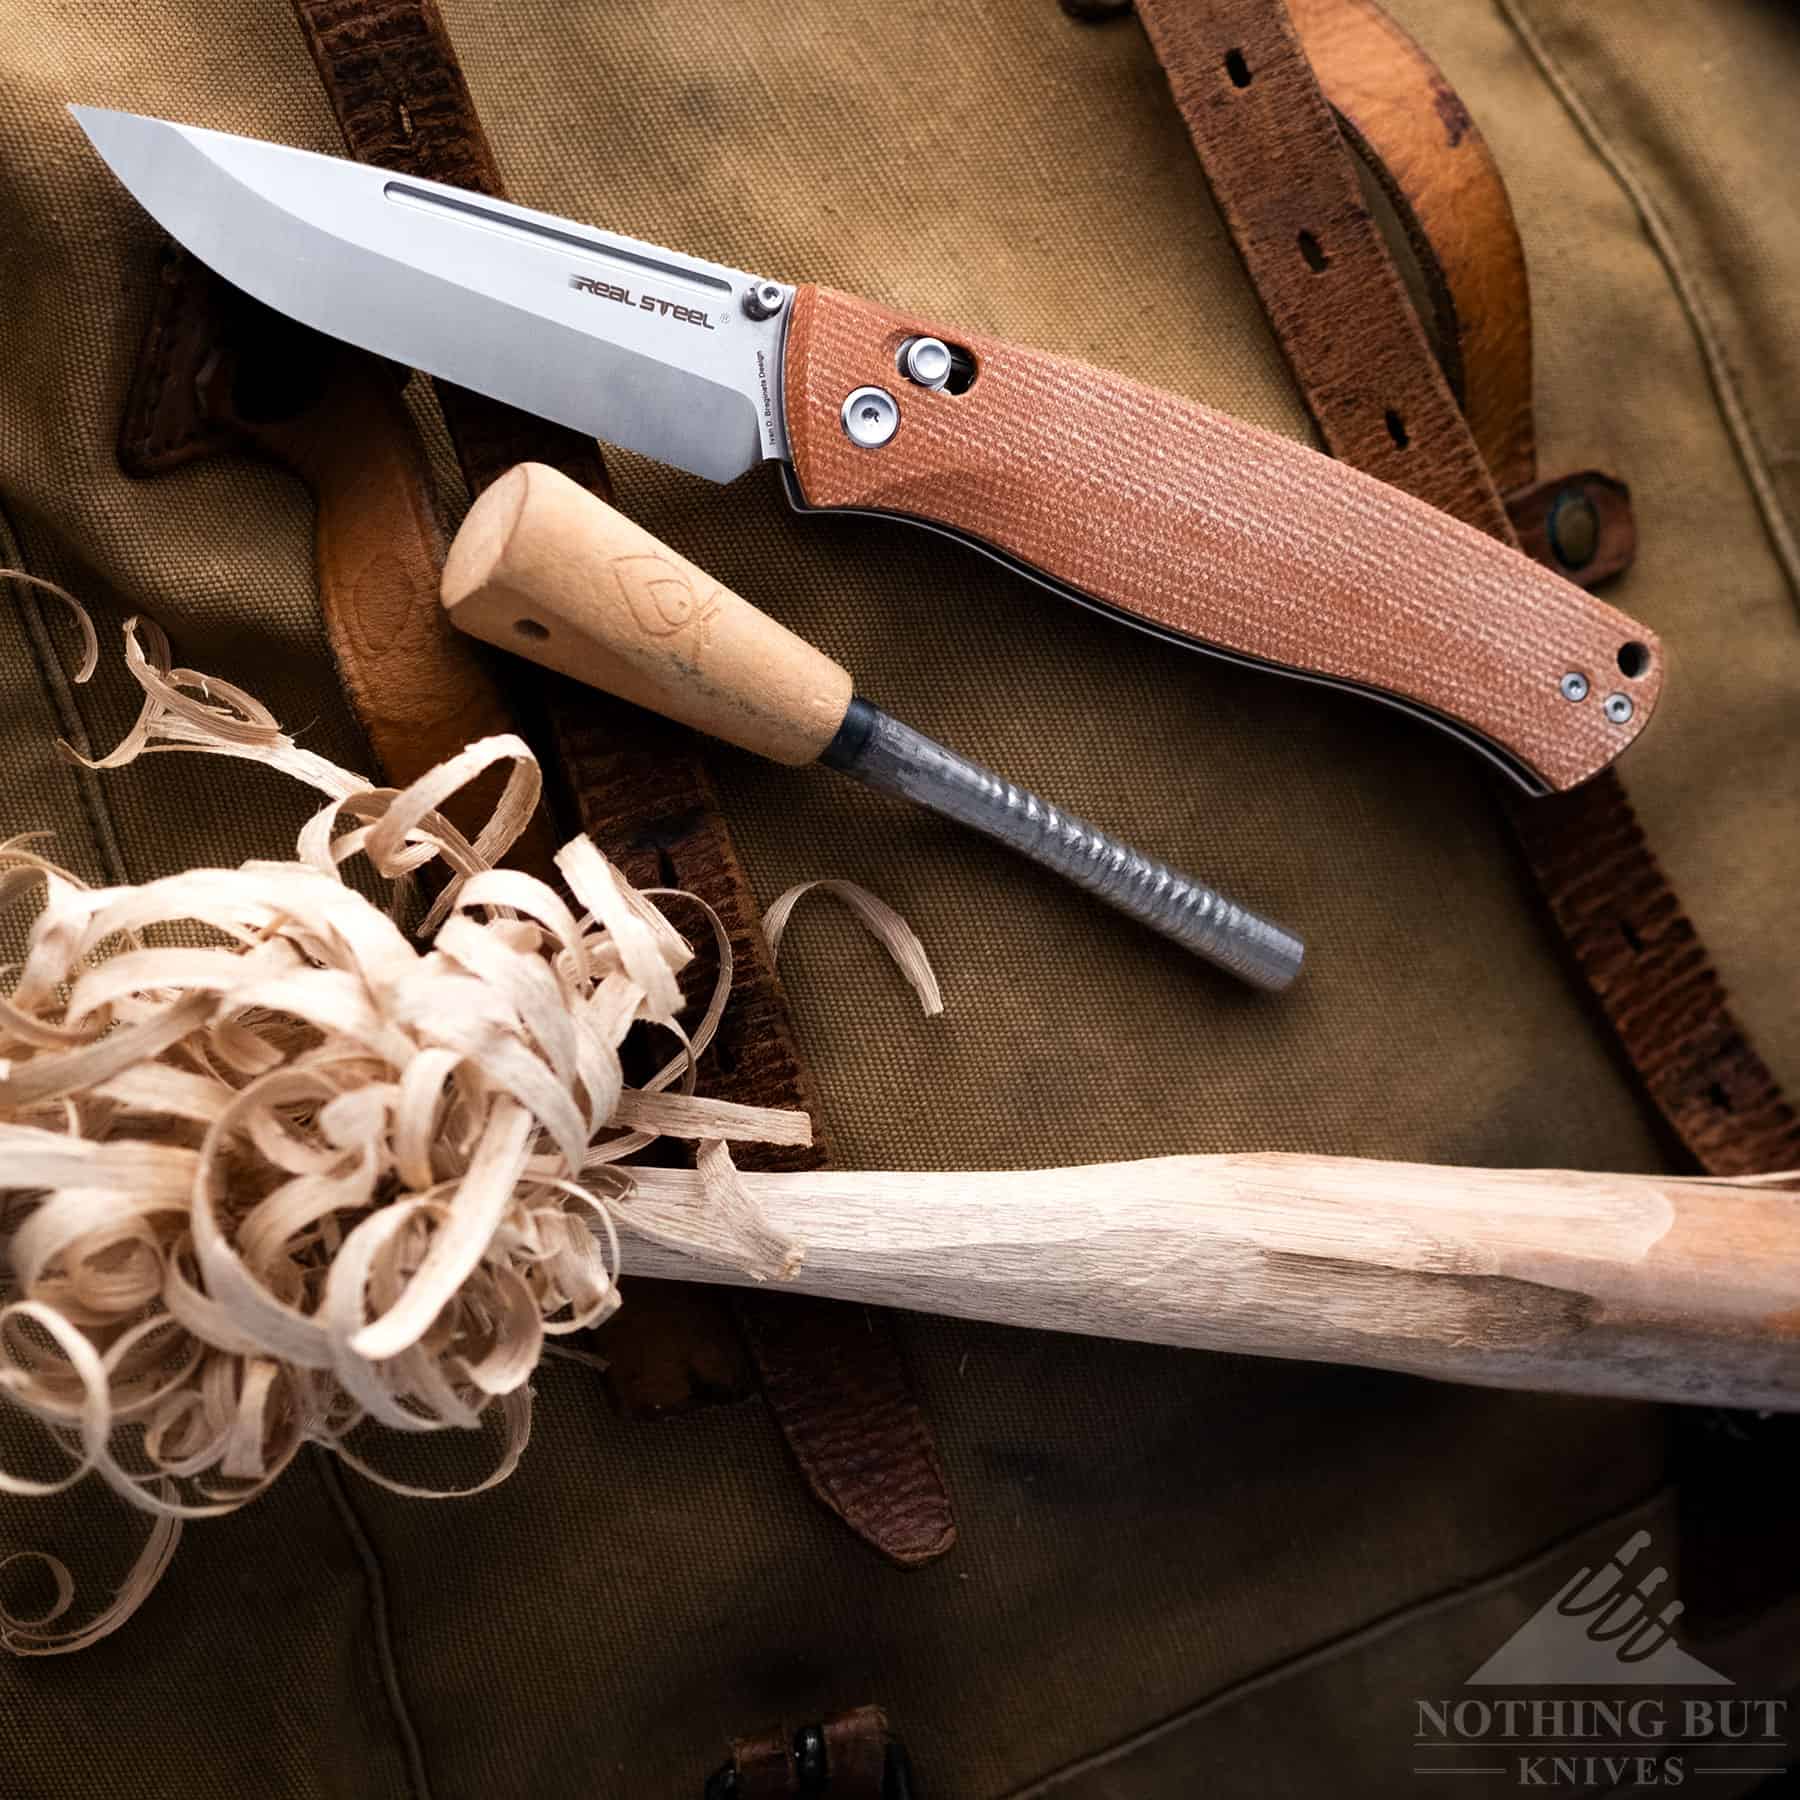 The Real Steel Pathfinder is capable of a most bushcraft tasks that don't require chopping or batoning. 